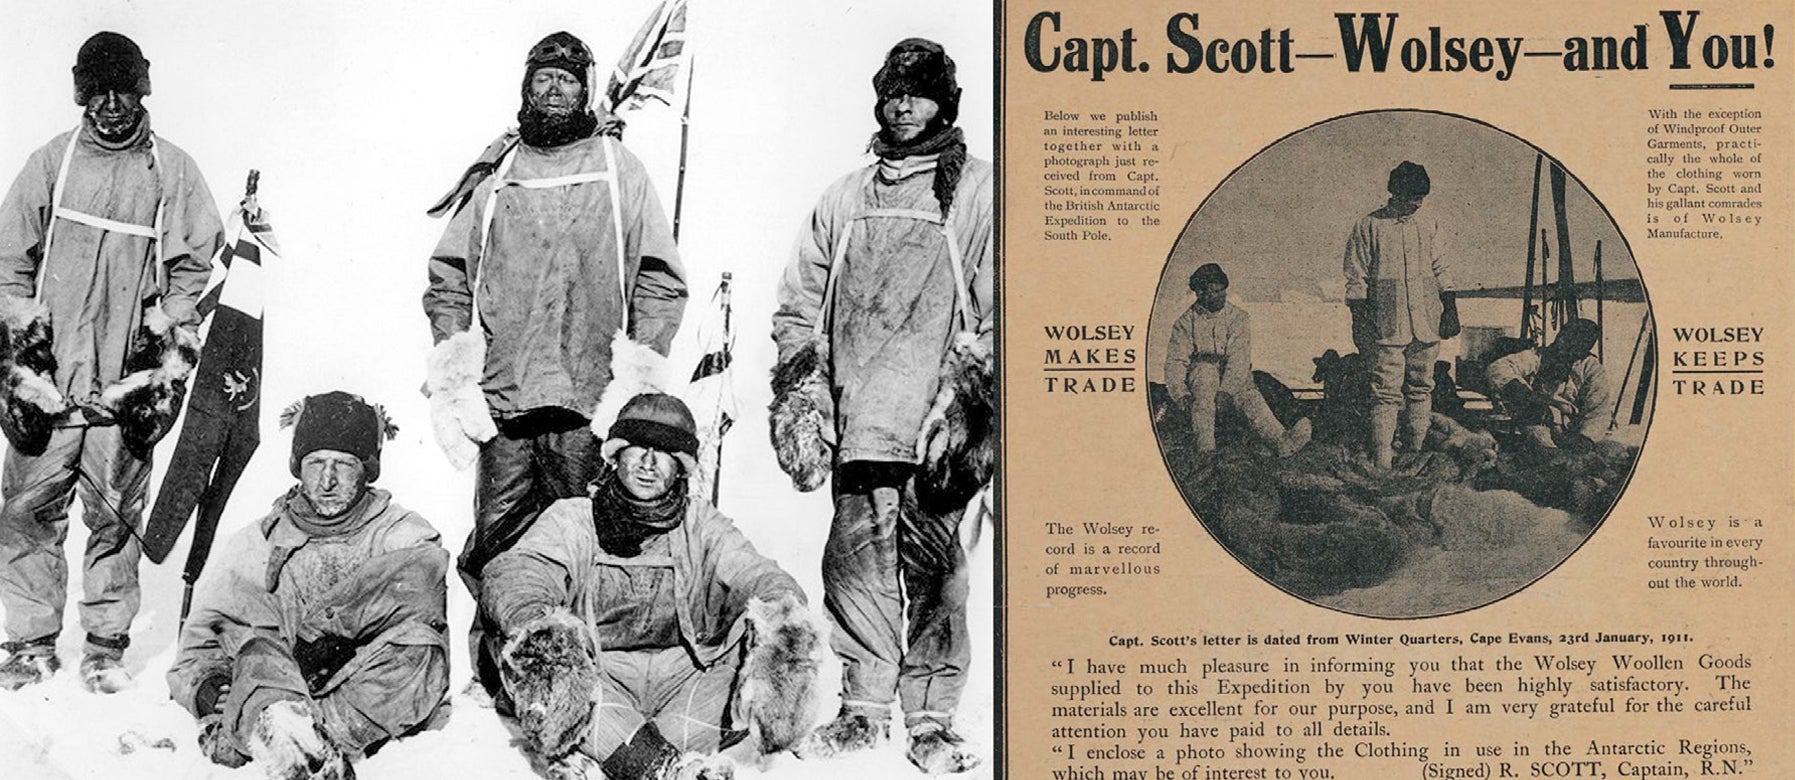 Published article on Captain Scott endorsing Wolsey for the race to reach south pole